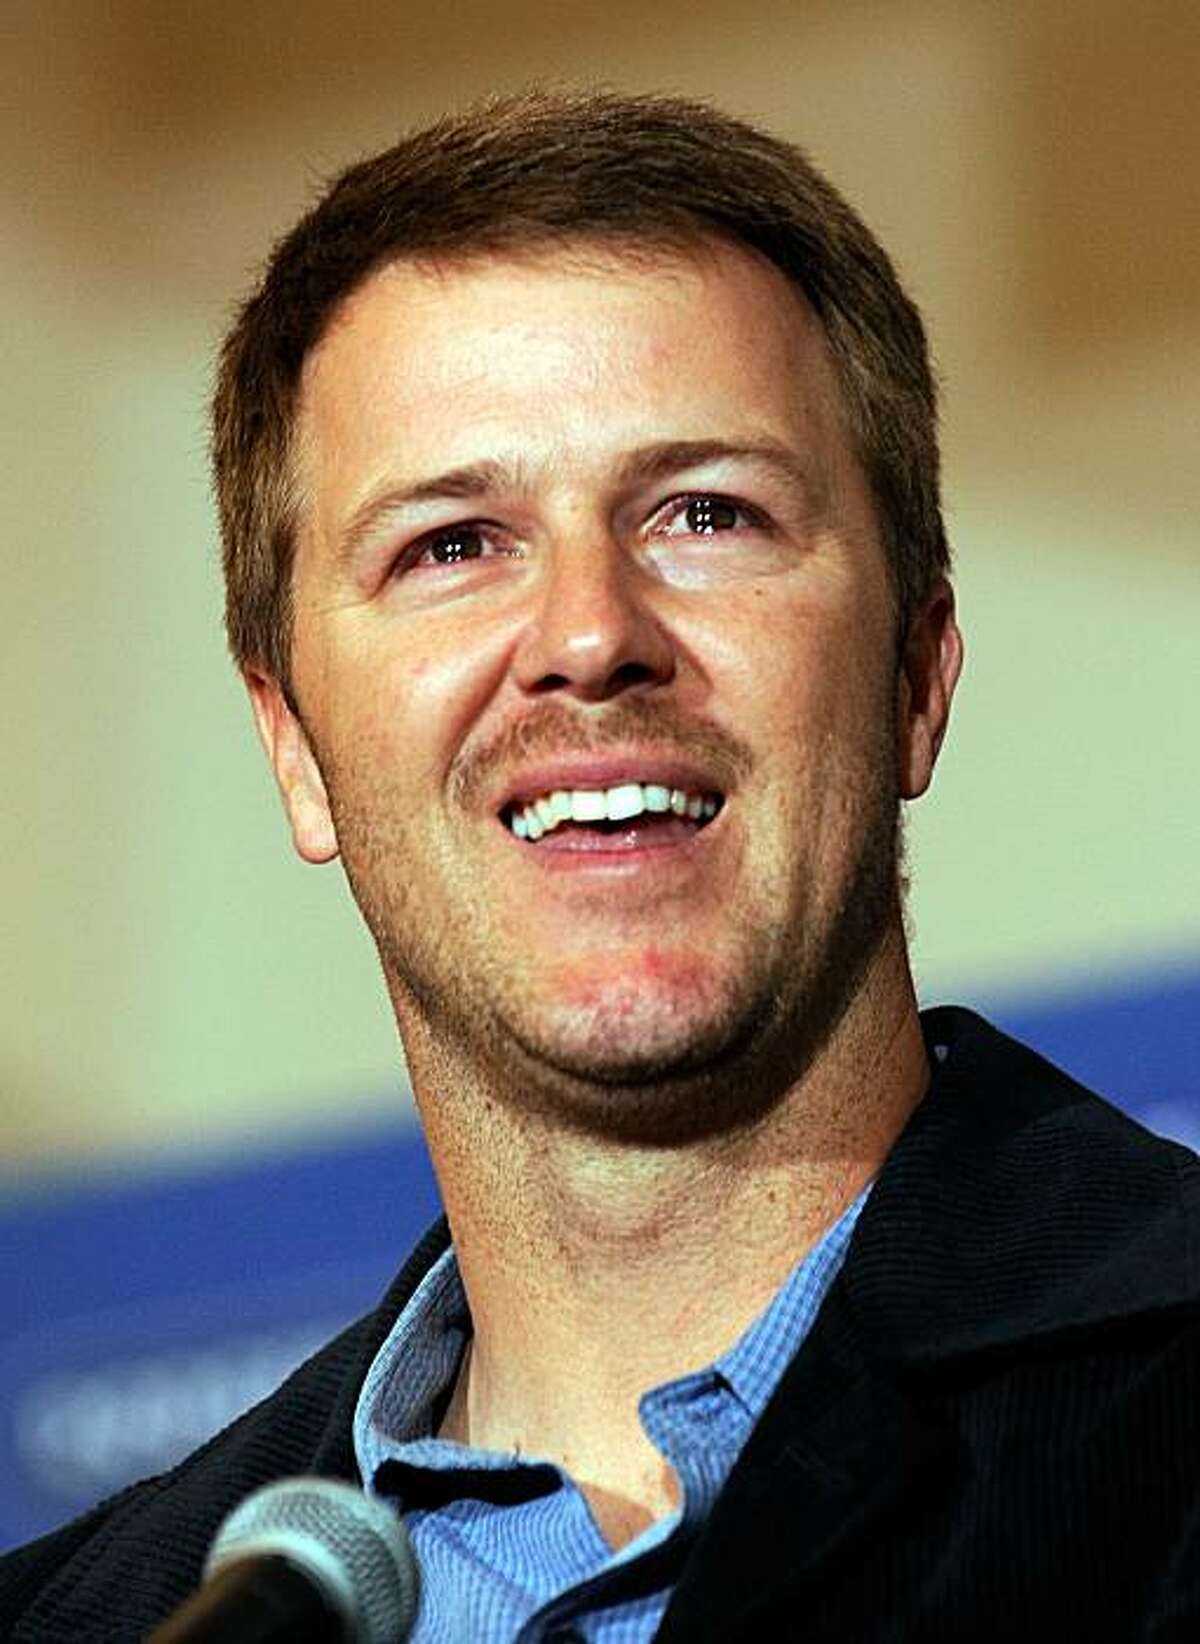 LOS ANGELES, CA - JANUARY 22: Jeff Kent #12 of the Los Angeles Dodgers and the major league record-holder for home runs by a second baseman announces his retirement after 17seasons in Major League Baseball at a press conference on January 22, 2009 at Dodger Stadium in Los Angeles. (Photo by Kevork Djansezian/Getty Images)